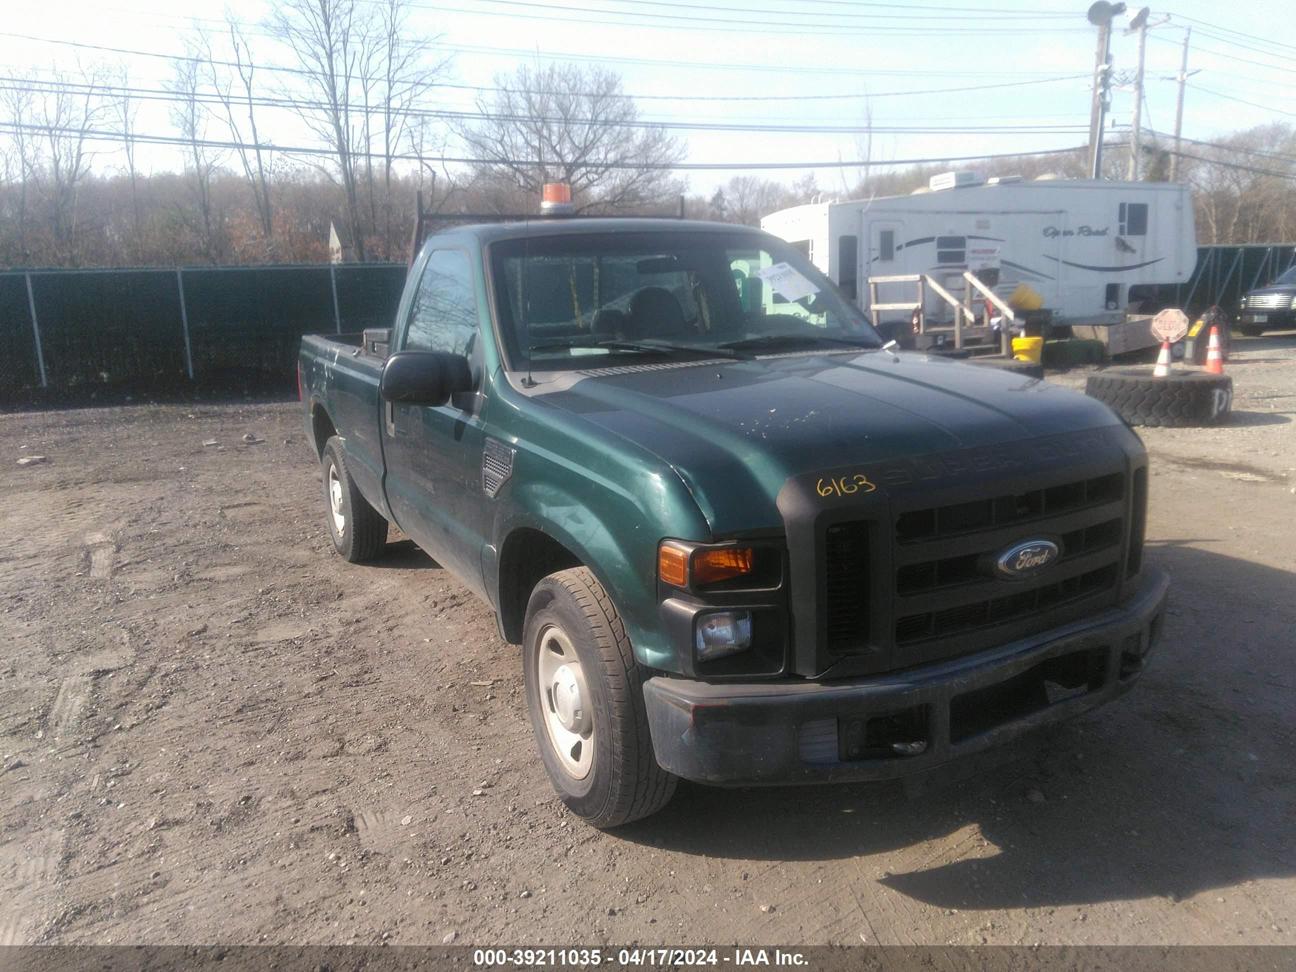 vin: 1FTNF20558EE35526 1FTNF20558EE35526 2008 ford f250 5400 for Sale in 11763, 139 Peconic Ave, Medford, New York, USA